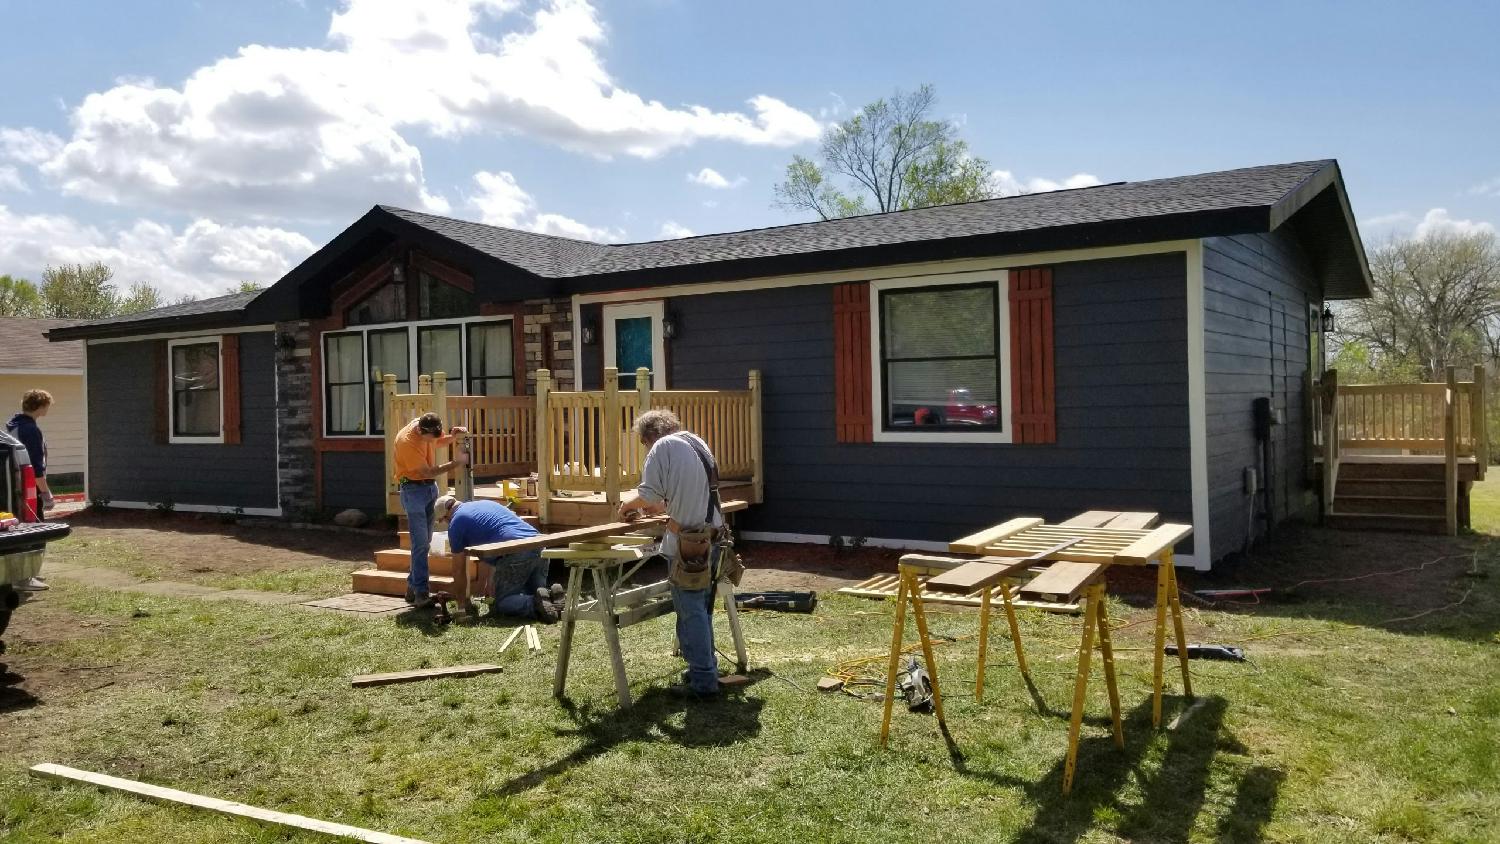 ESCO's Des Moines team helps out a family with home improvements with a leading nonprofit, Rebuilding Together.